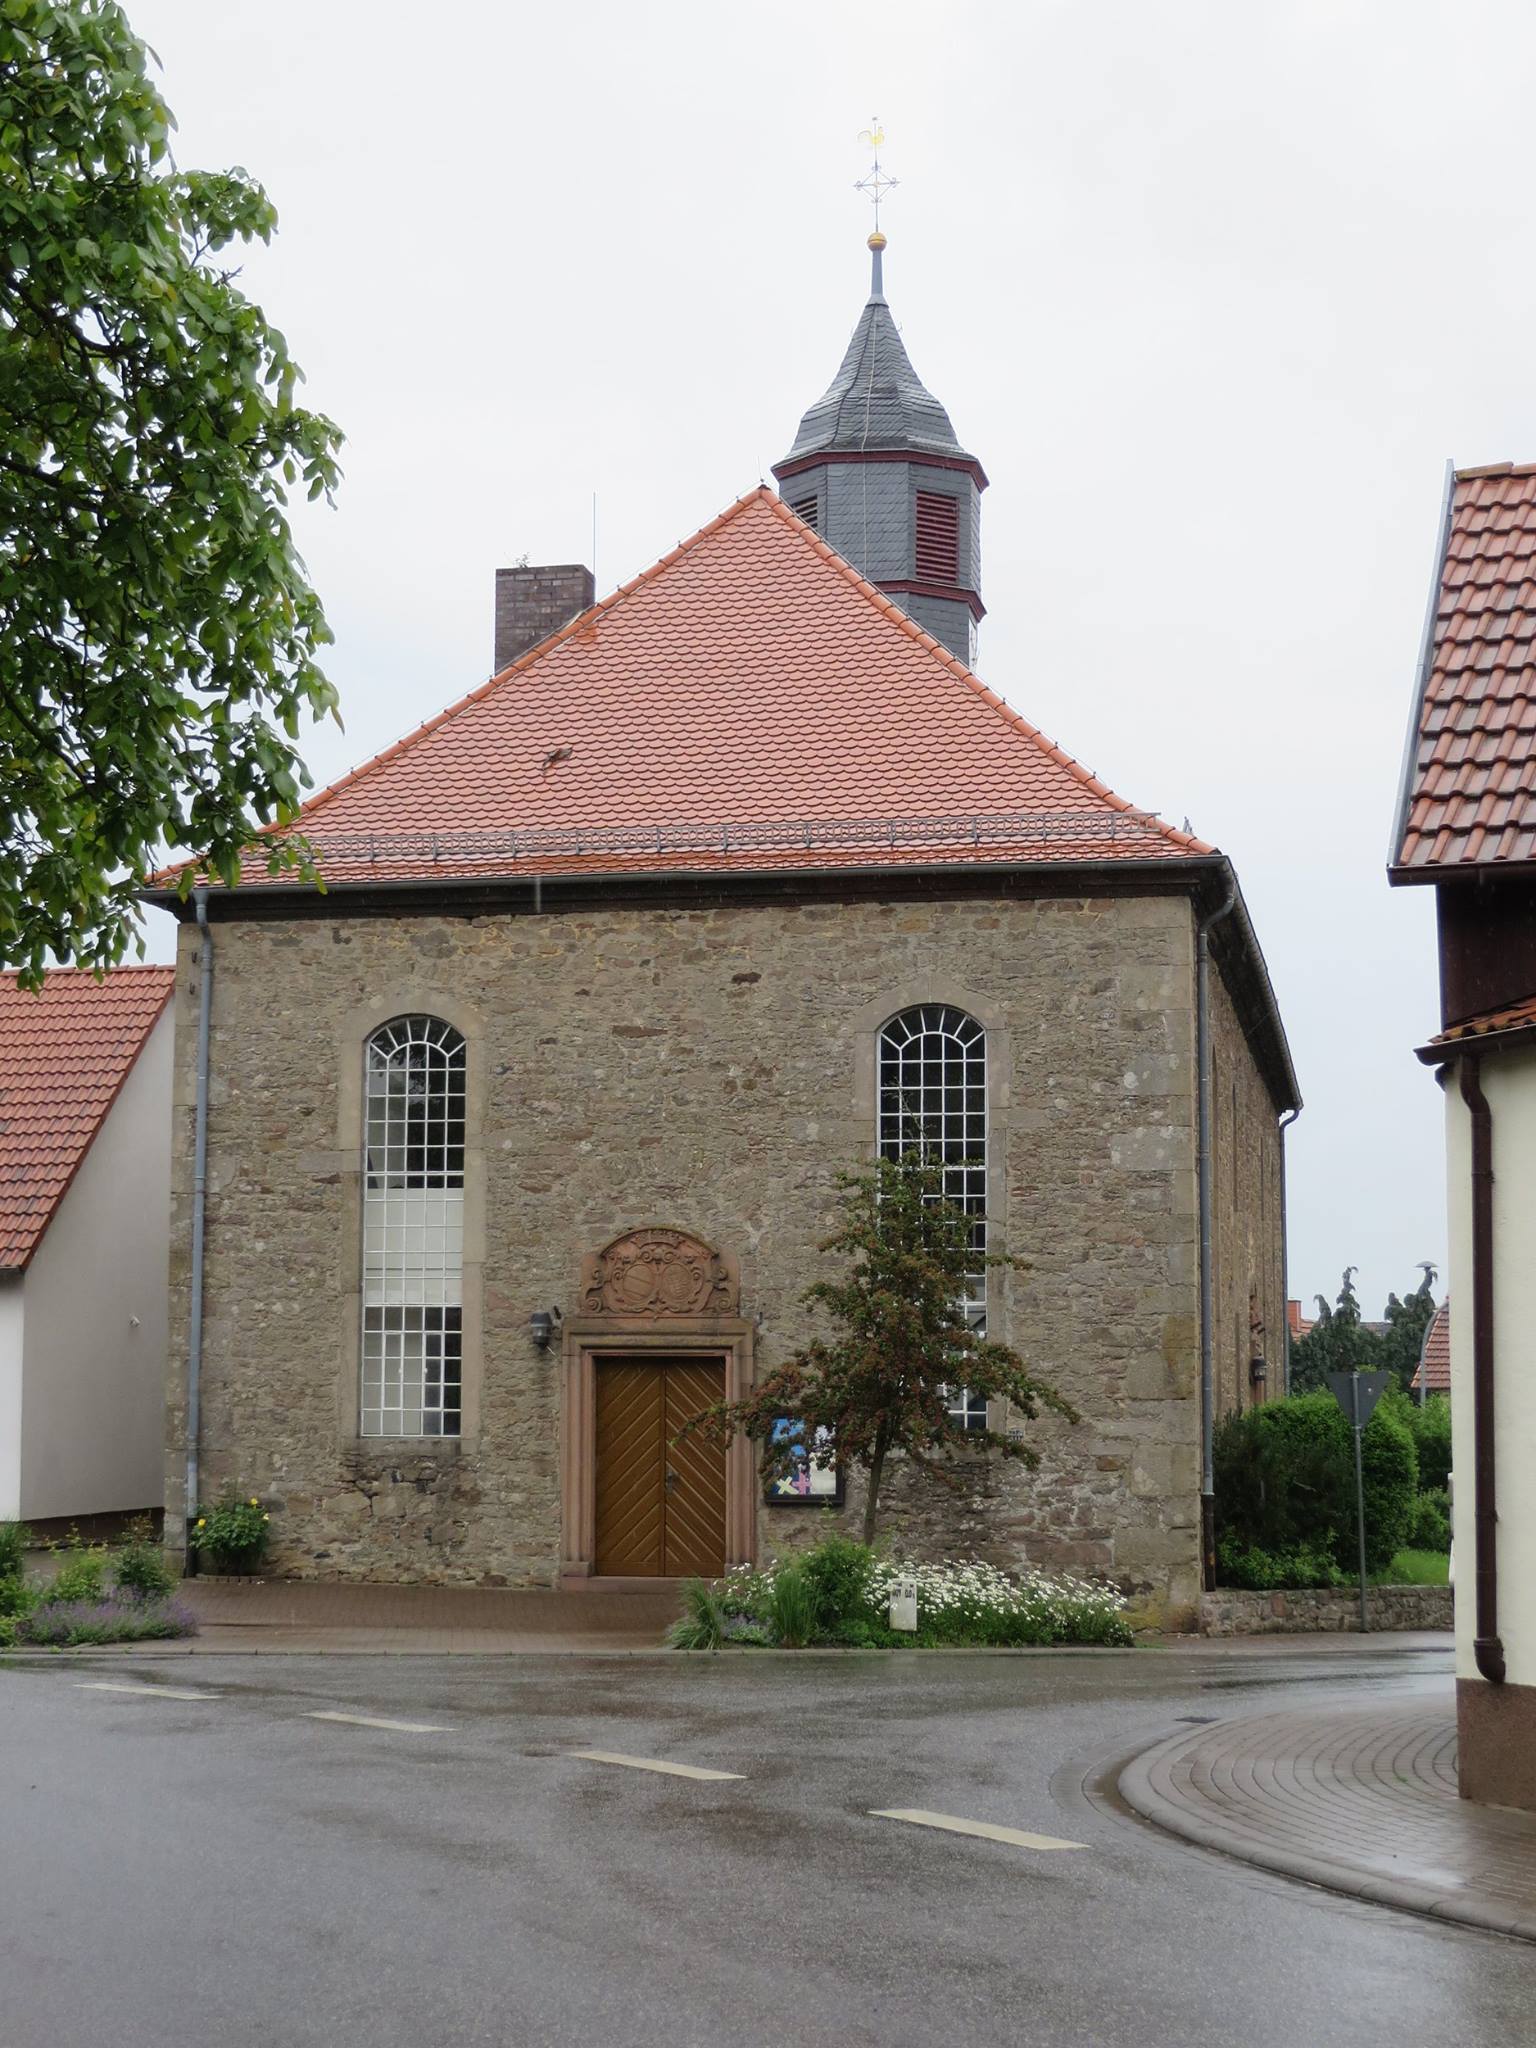 Photo of church in Spielberg in 2016. Courtesy of Maggie Hein.